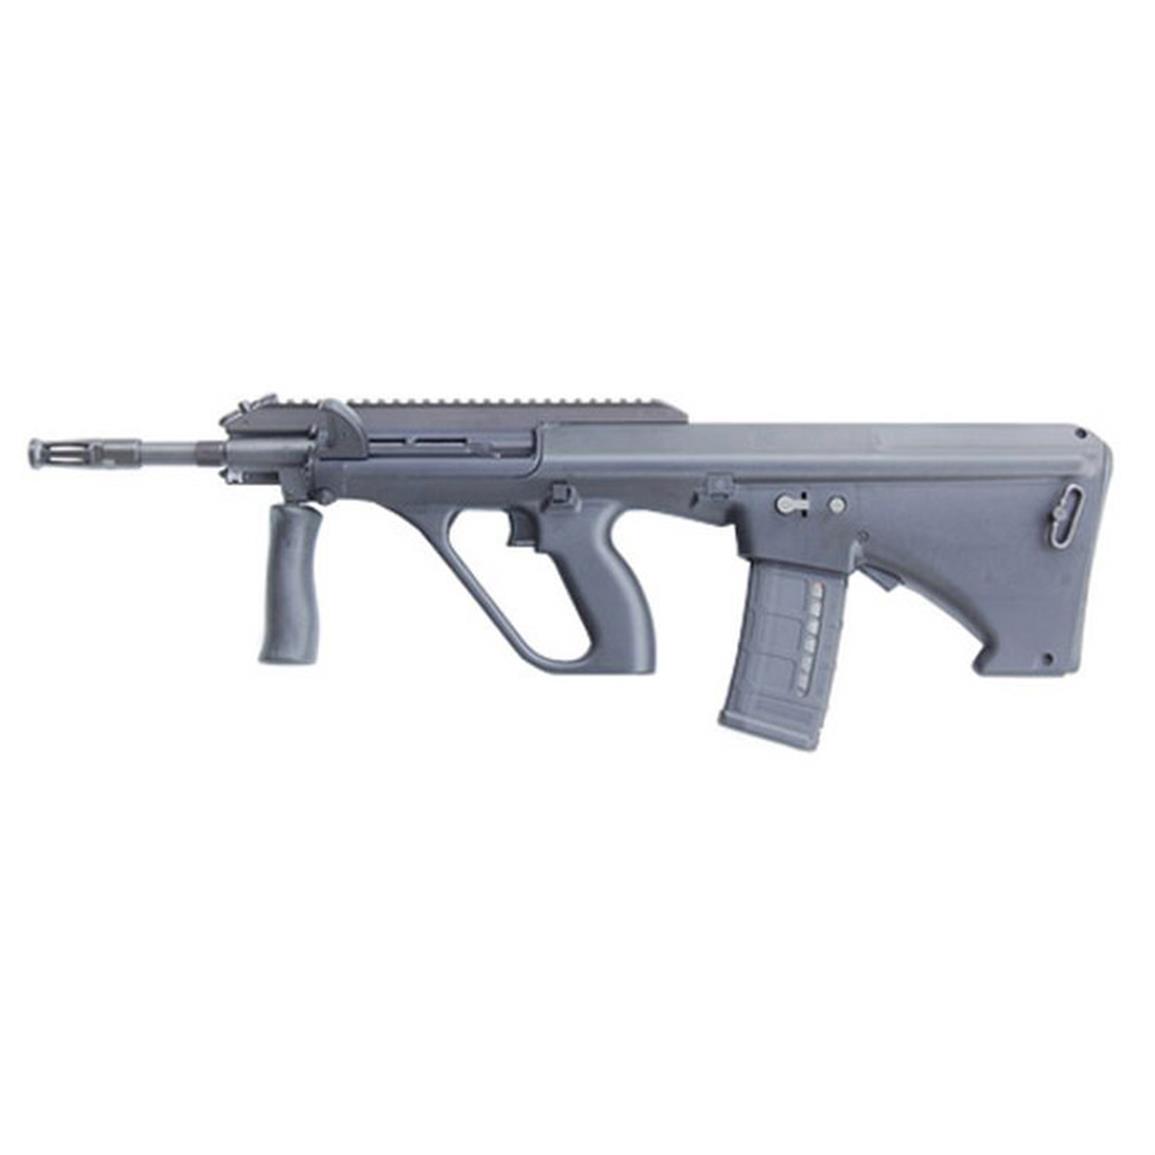 Steyr Arms AUG A3 M1, Semi-Automatic, 5.56x45mm, 16" Barrel, 1.5X Integrated Optic, 30+1 Rounds